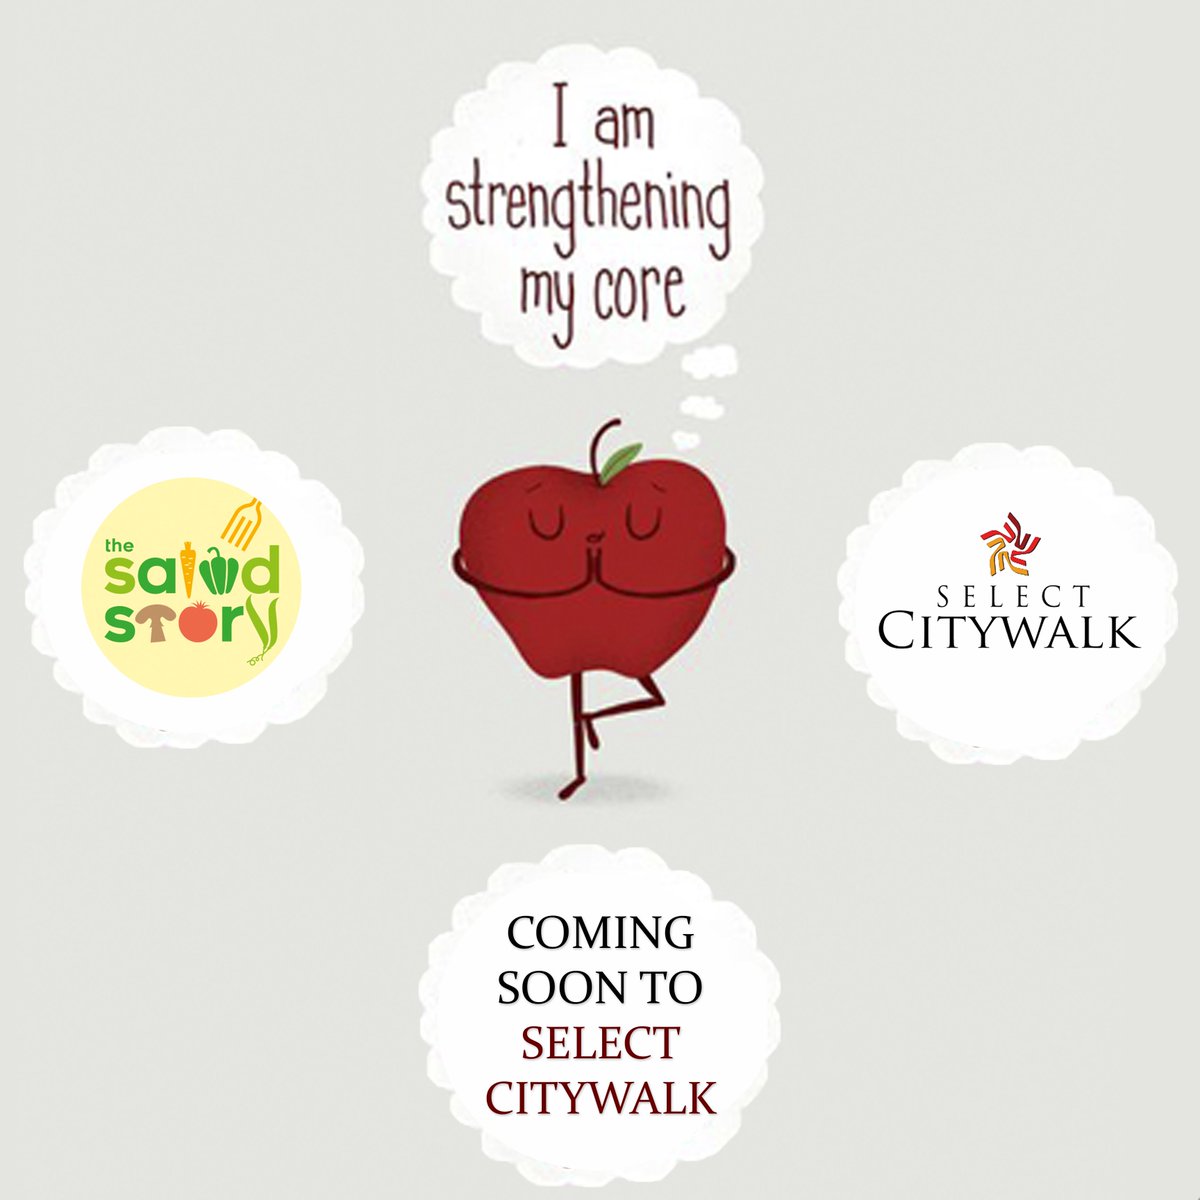 We are coming to get your love in exchange of our #wholesomemeals
Get ready Citywalkers !!
.
.
Order Now : thesaladstory.com
#delhincr